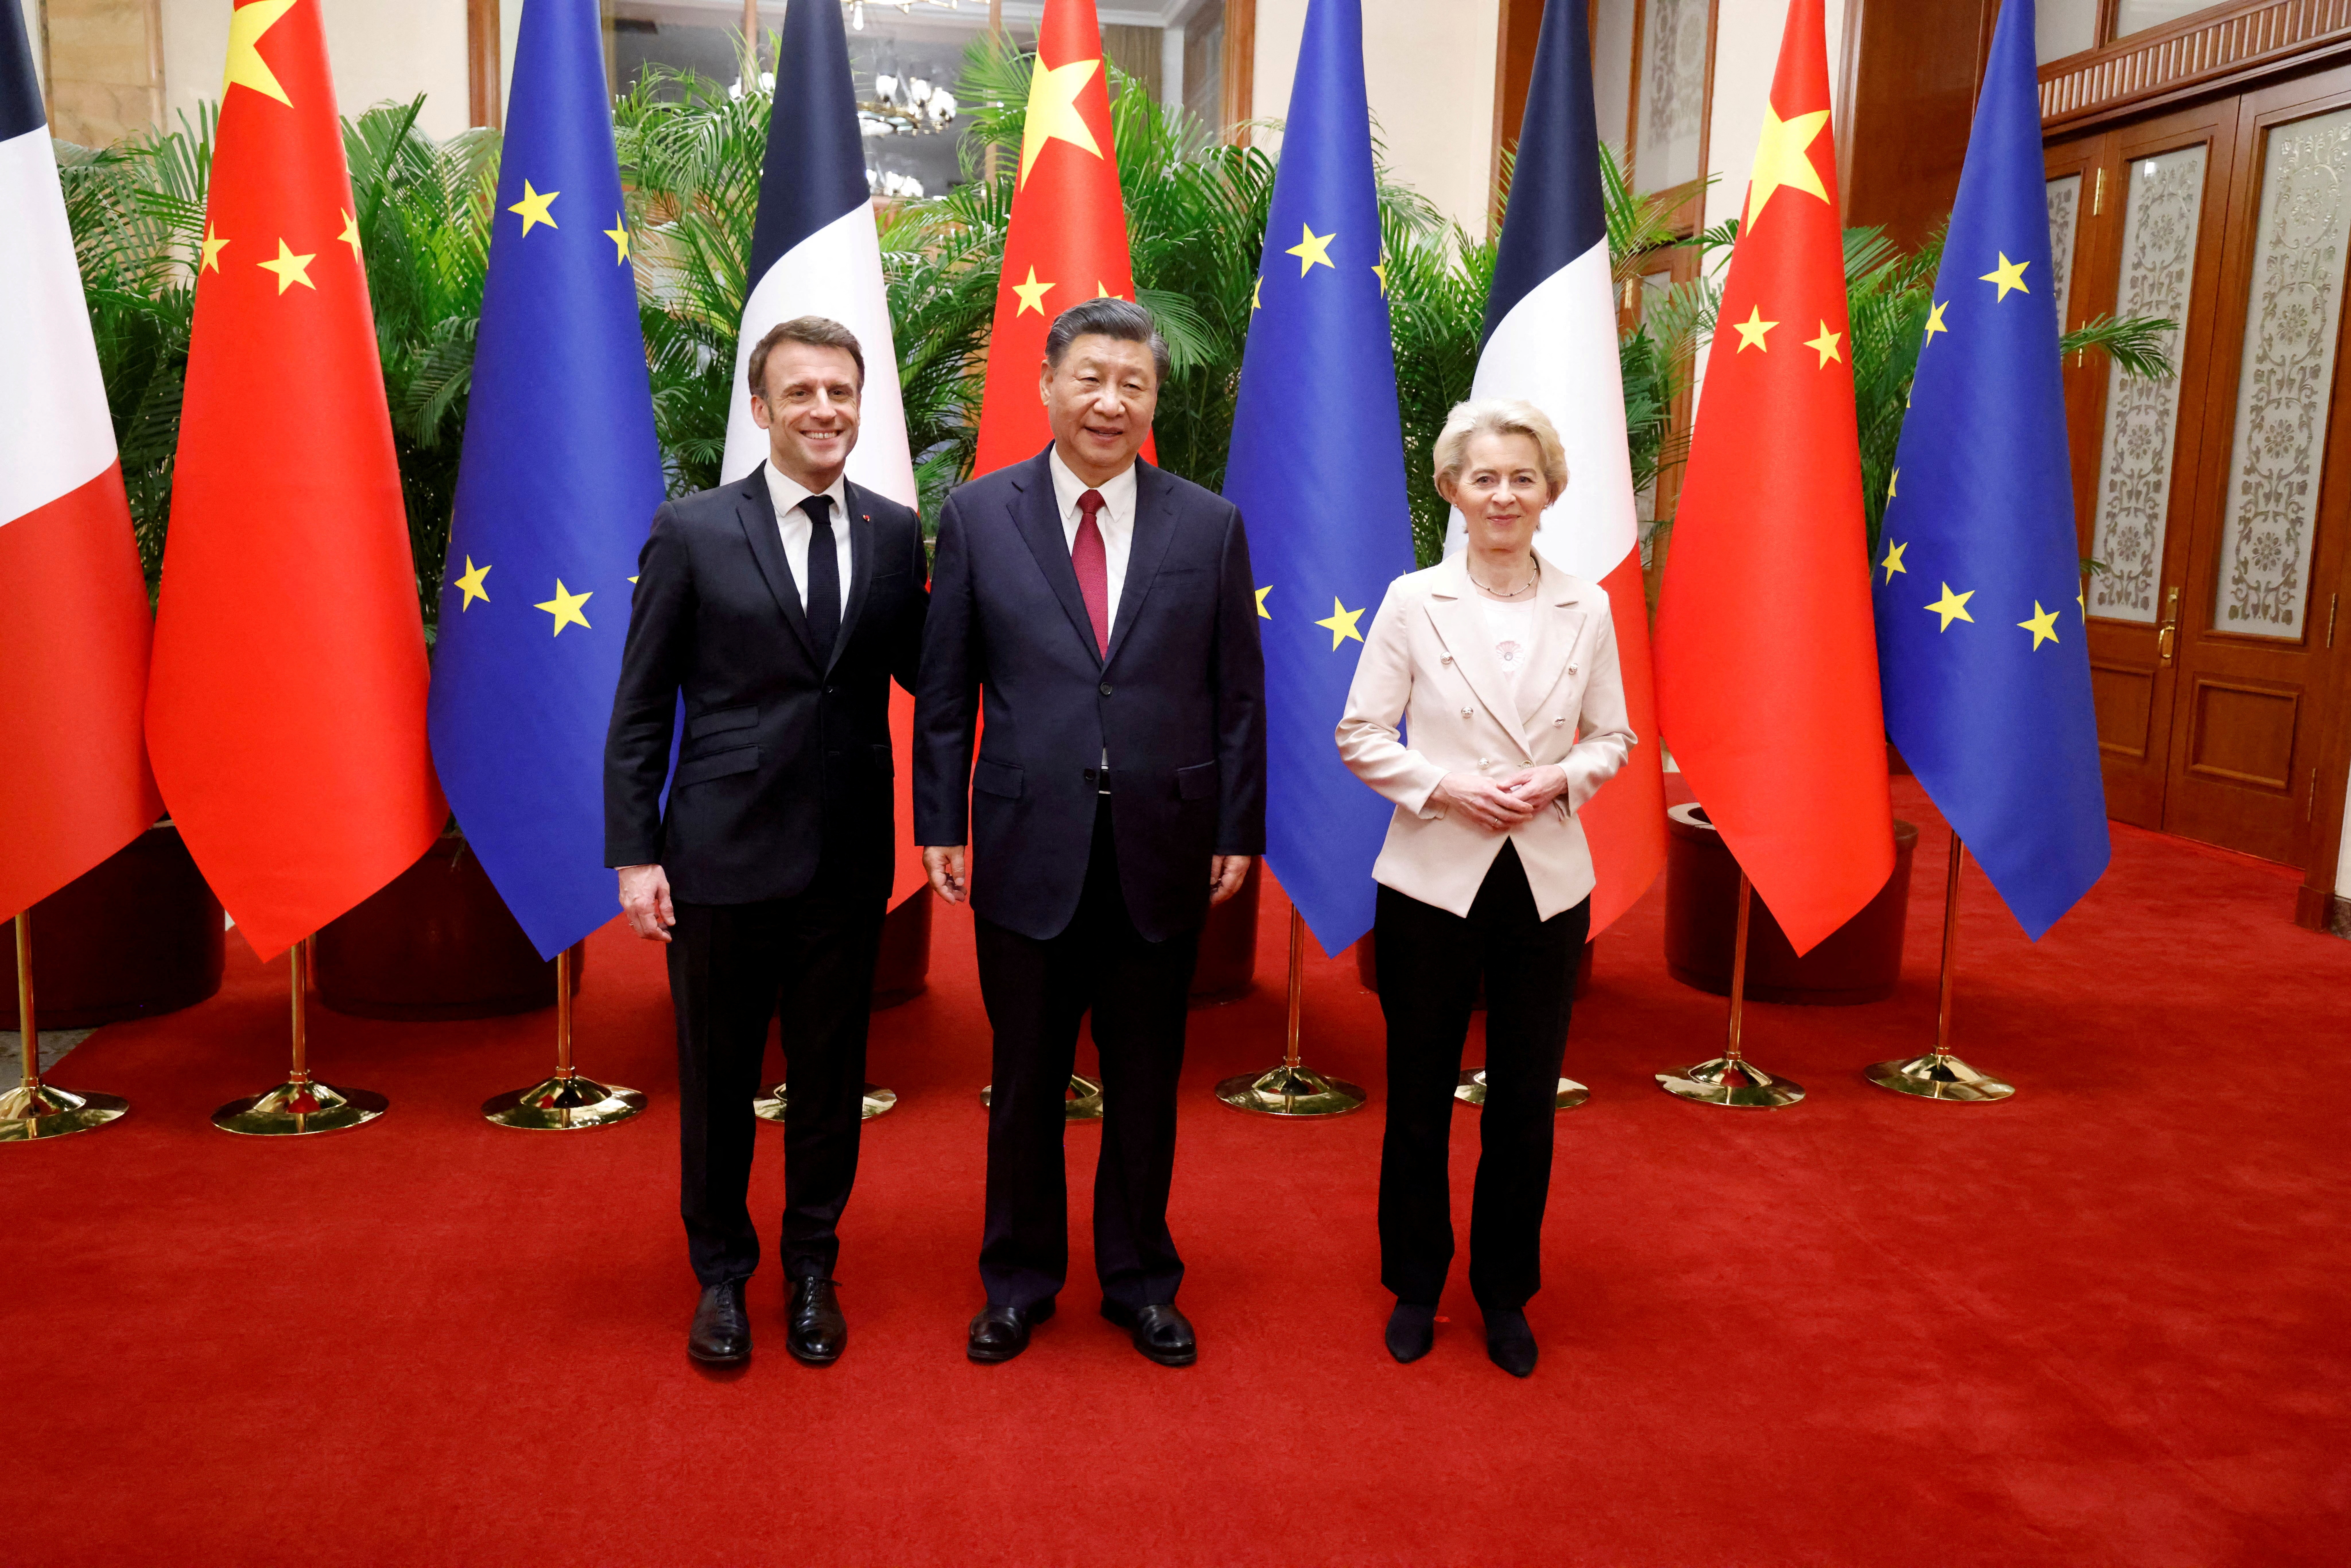 image China and EU hold talks on AI, cross-border data flow amid renewed tensions